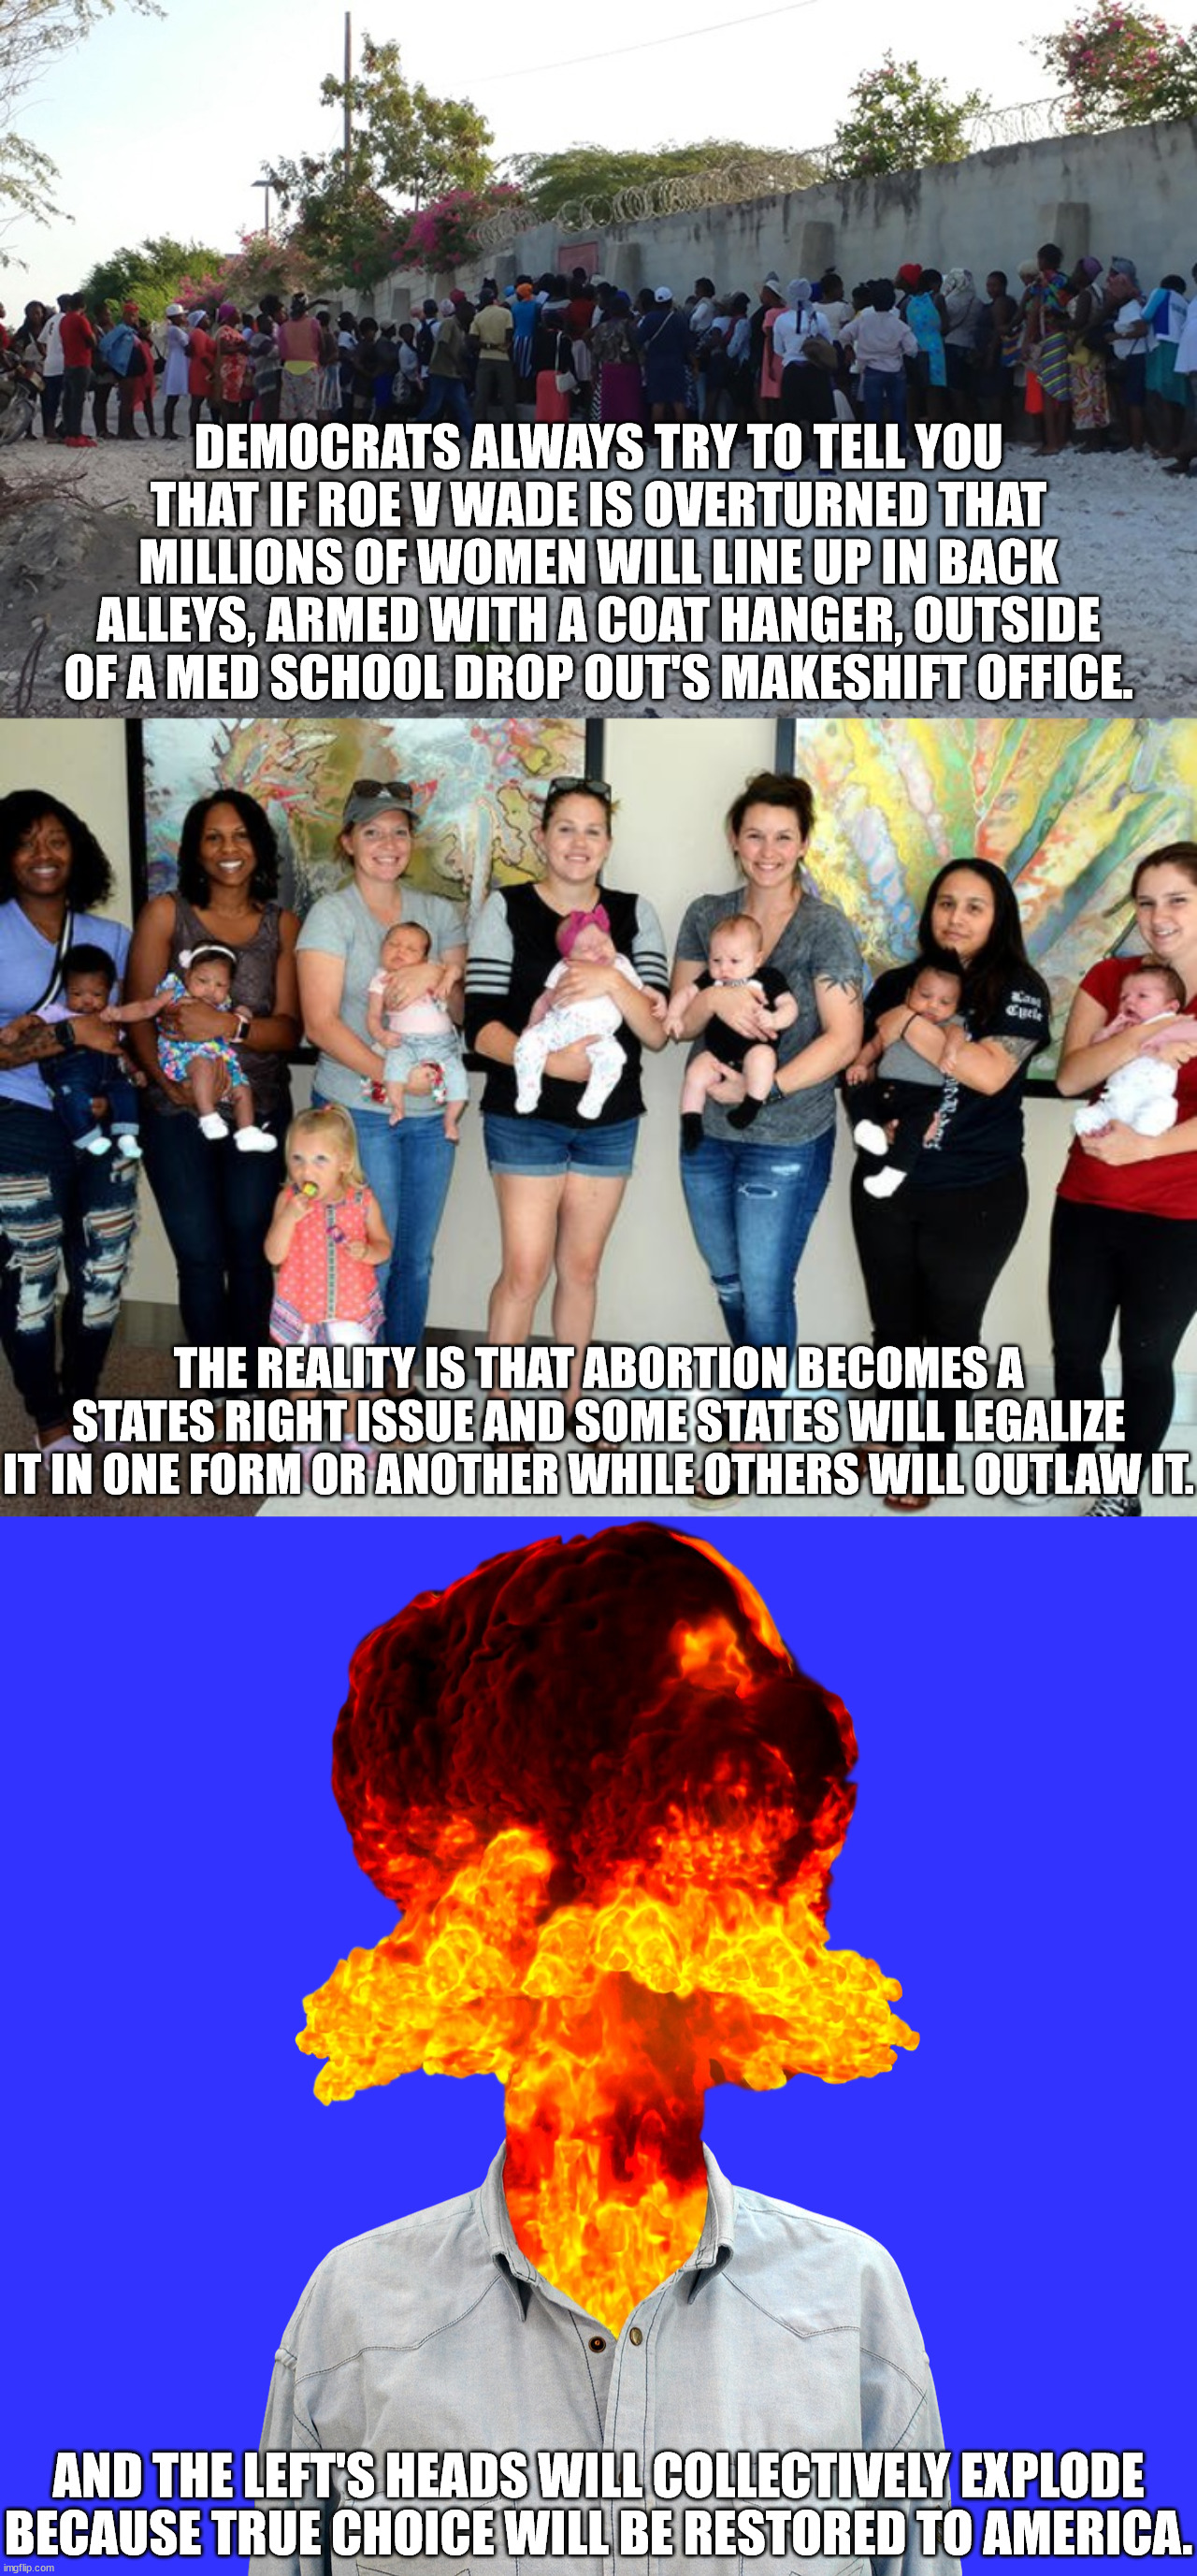 To those who enjoy murdering babies, don't cry.  It's not the end of the world.  You'll still get to murder babies in your blue  | DEMOCRATS ALWAYS TRY TO TELL YOU THAT IF ROE V WADE IS OVERTURNED THAT MILLIONS OF WOMEN WILL LINE UP IN BACK ALLEYS, ARMED WITH A COAT HANGER, OUTSIDE OF A MED SCHOOL DROP OUT'S MAKESHIFT OFFICE. THE REALITY IS THAT ABORTION BECOMES A STATES RIGHT ISSUE AND SOME STATES WILL LEGALIZE IT IN ONE FORM OR ANOTHER WHILE OTHERS WILL OUTLAW IT. AND THE LEFT'S HEADS WILL COLLECTIVELY EXPLODE
BECAUSE TRUE CHOICE WILL BE RESTORED TO AMERICA. | image tagged in roe v wade,scotus can not legislate,roe v wade unconstitutional | made w/ Imgflip meme maker